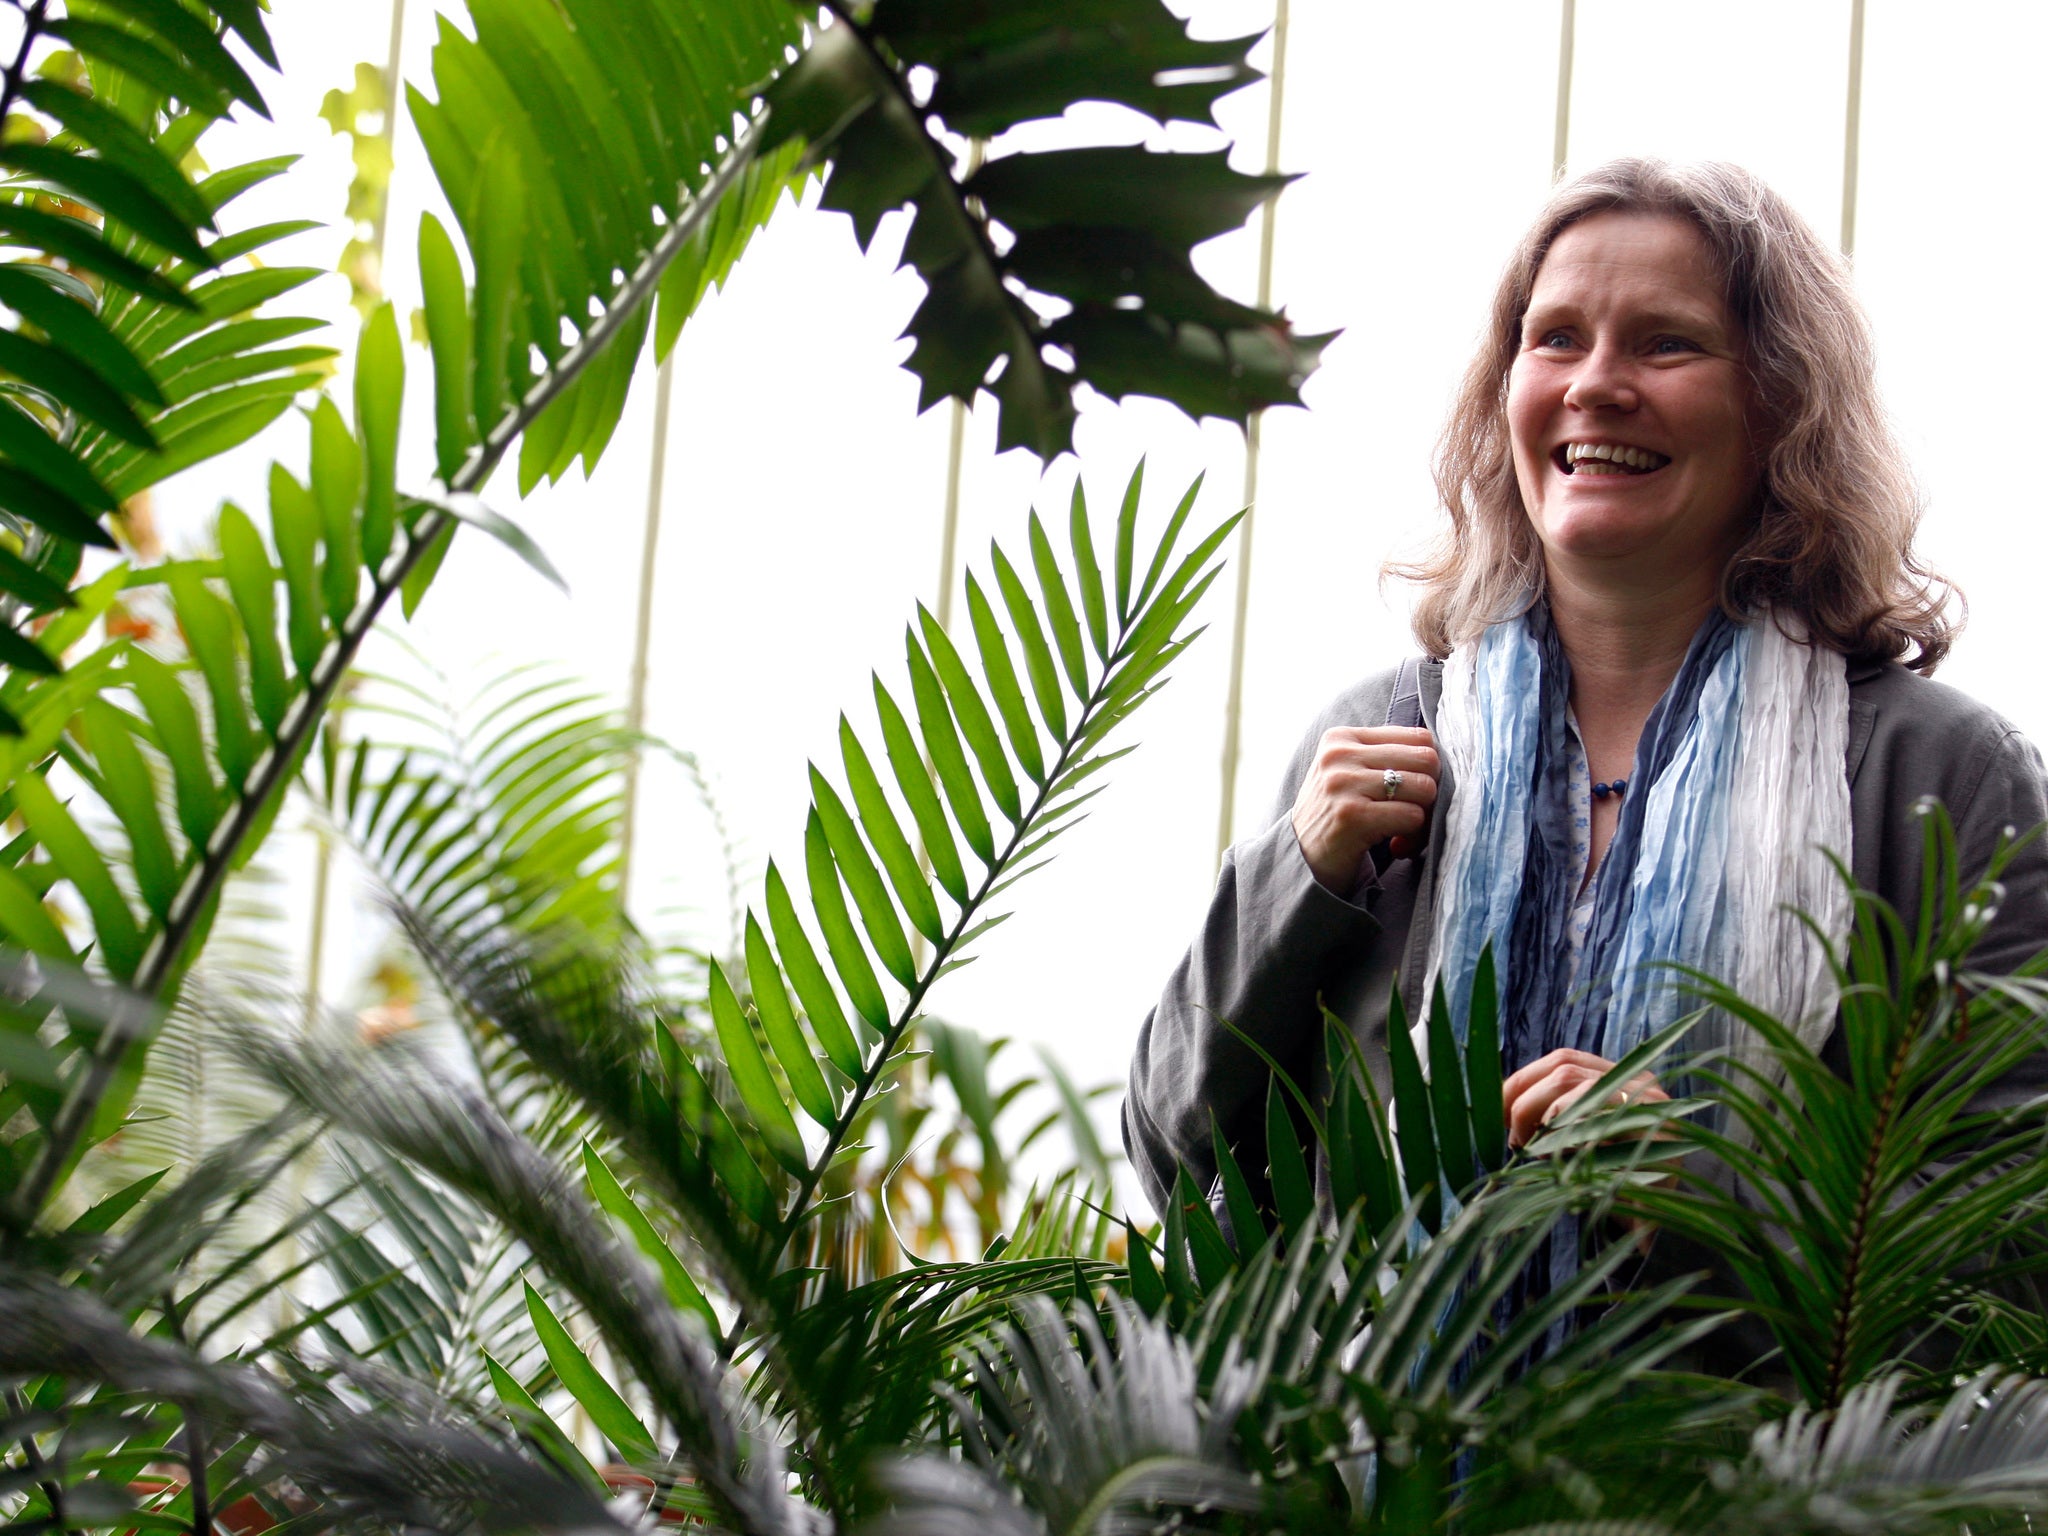 Senior scientist Eimear Nic Lughadha poses for a photograph in a greenhouse in Kew Gardens